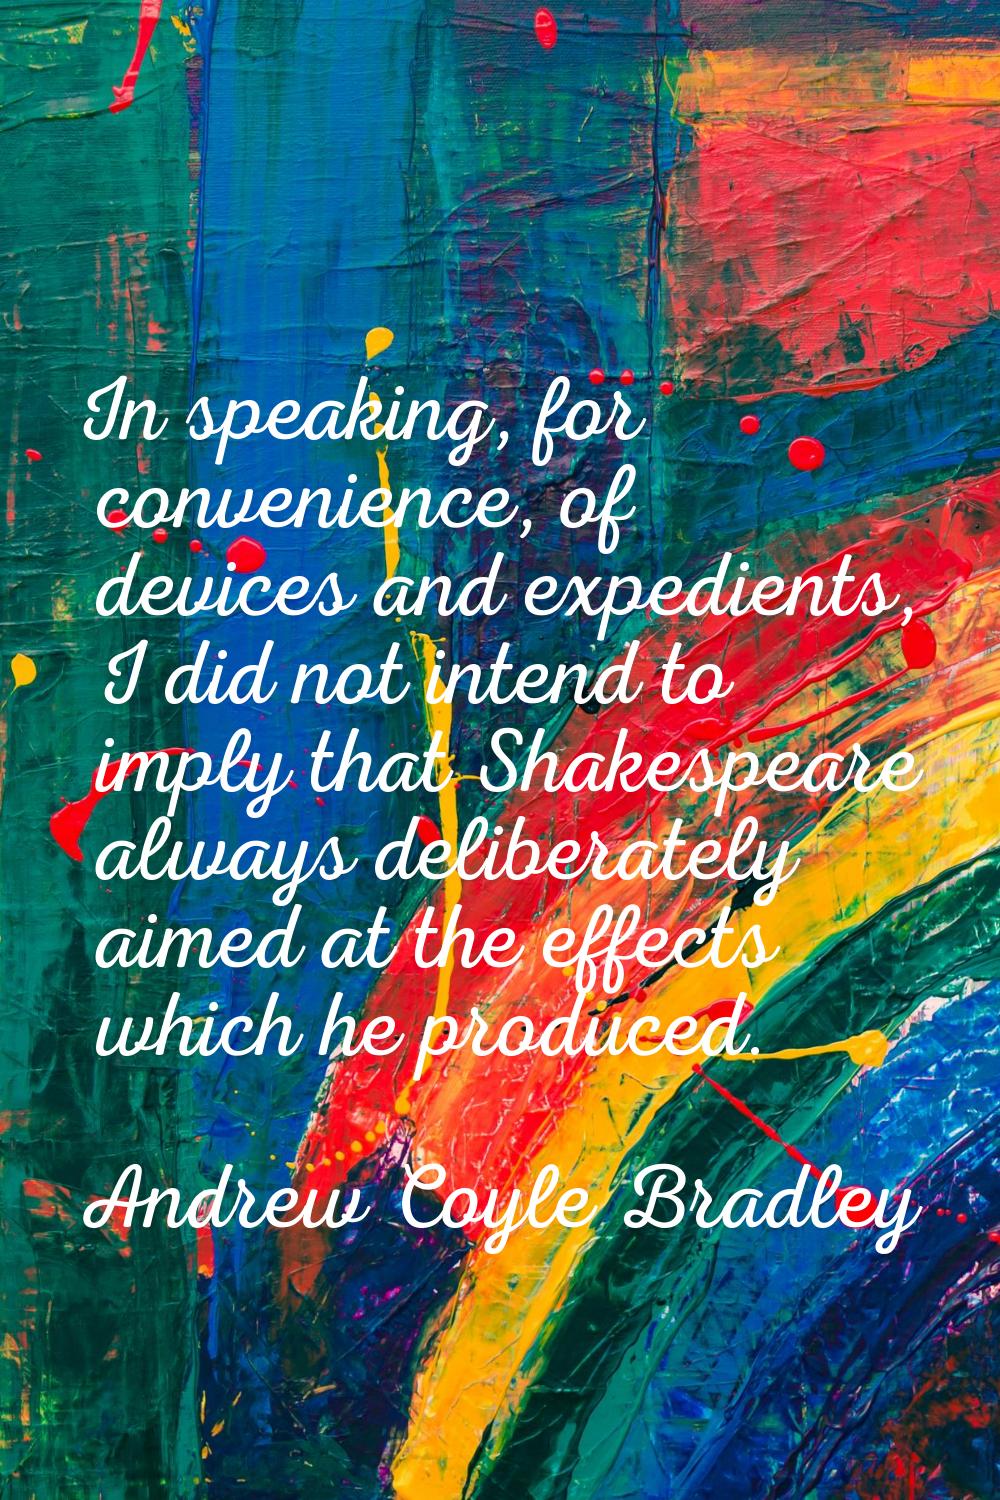 In speaking, for convenience, of devices and expedients, I did not intend to imply that Shakespeare